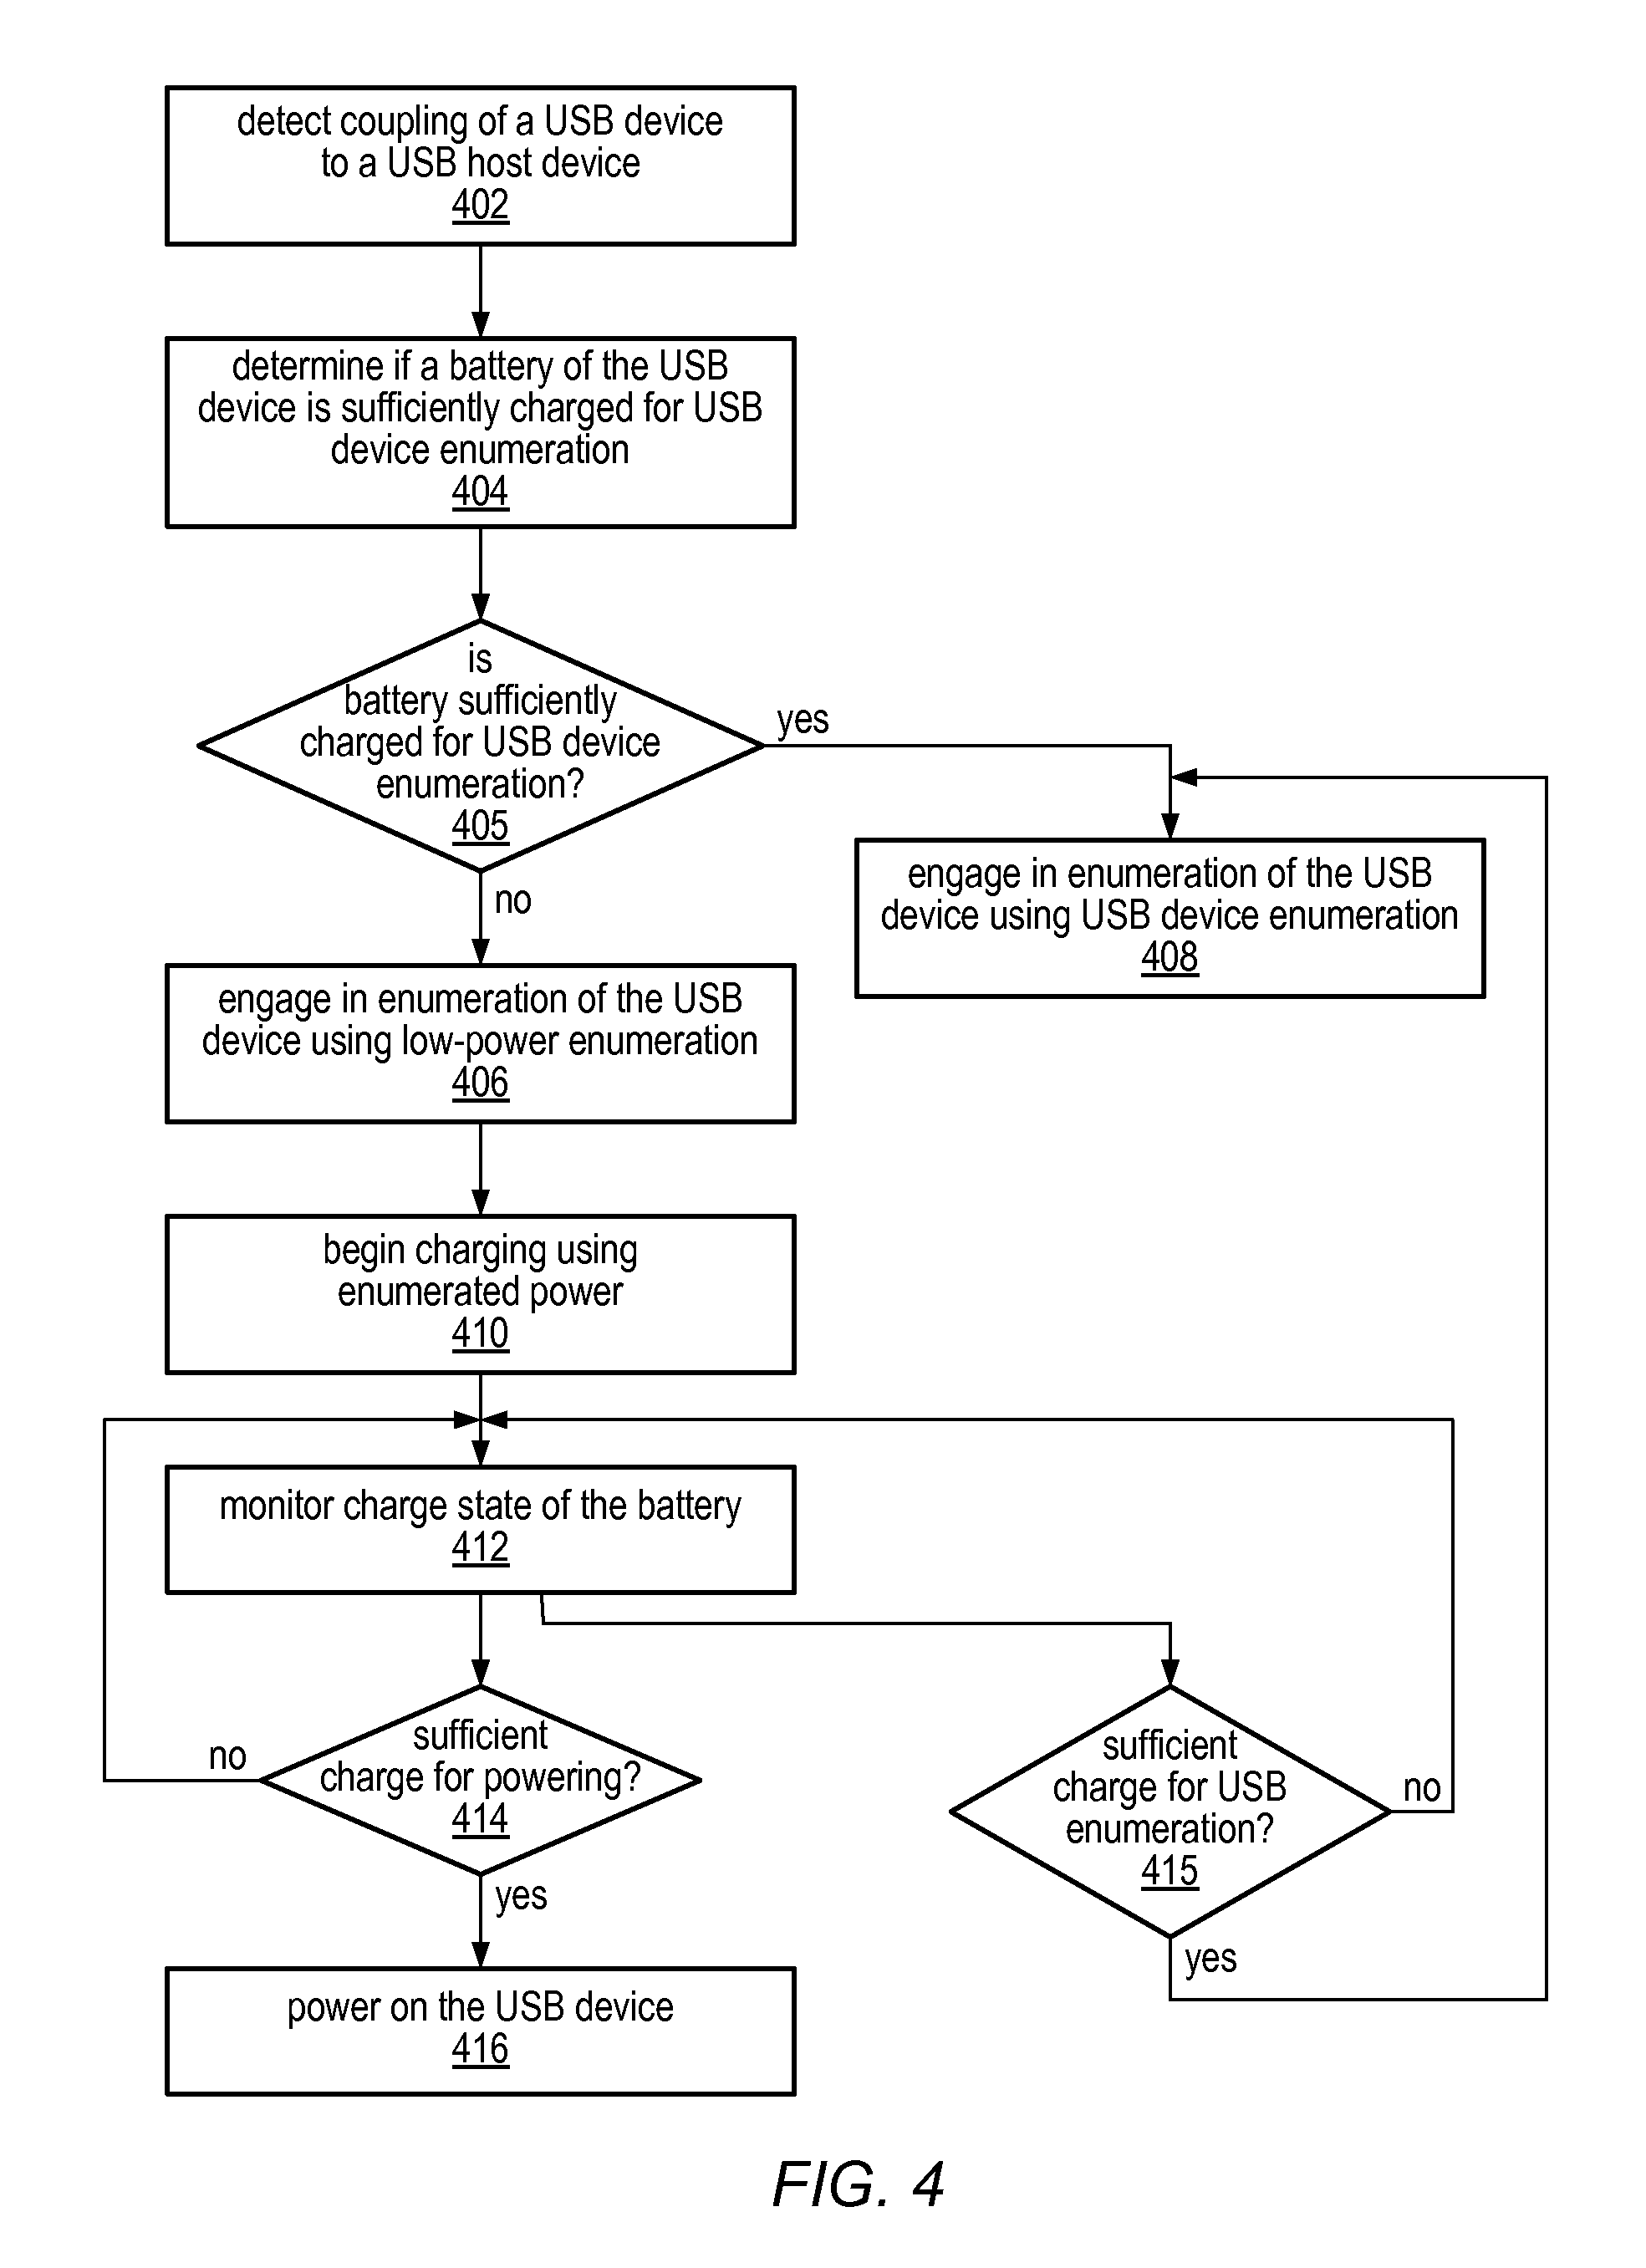 System method for rapidly charging USB device's battery wherein USB device requests charging the battery at a higher power level